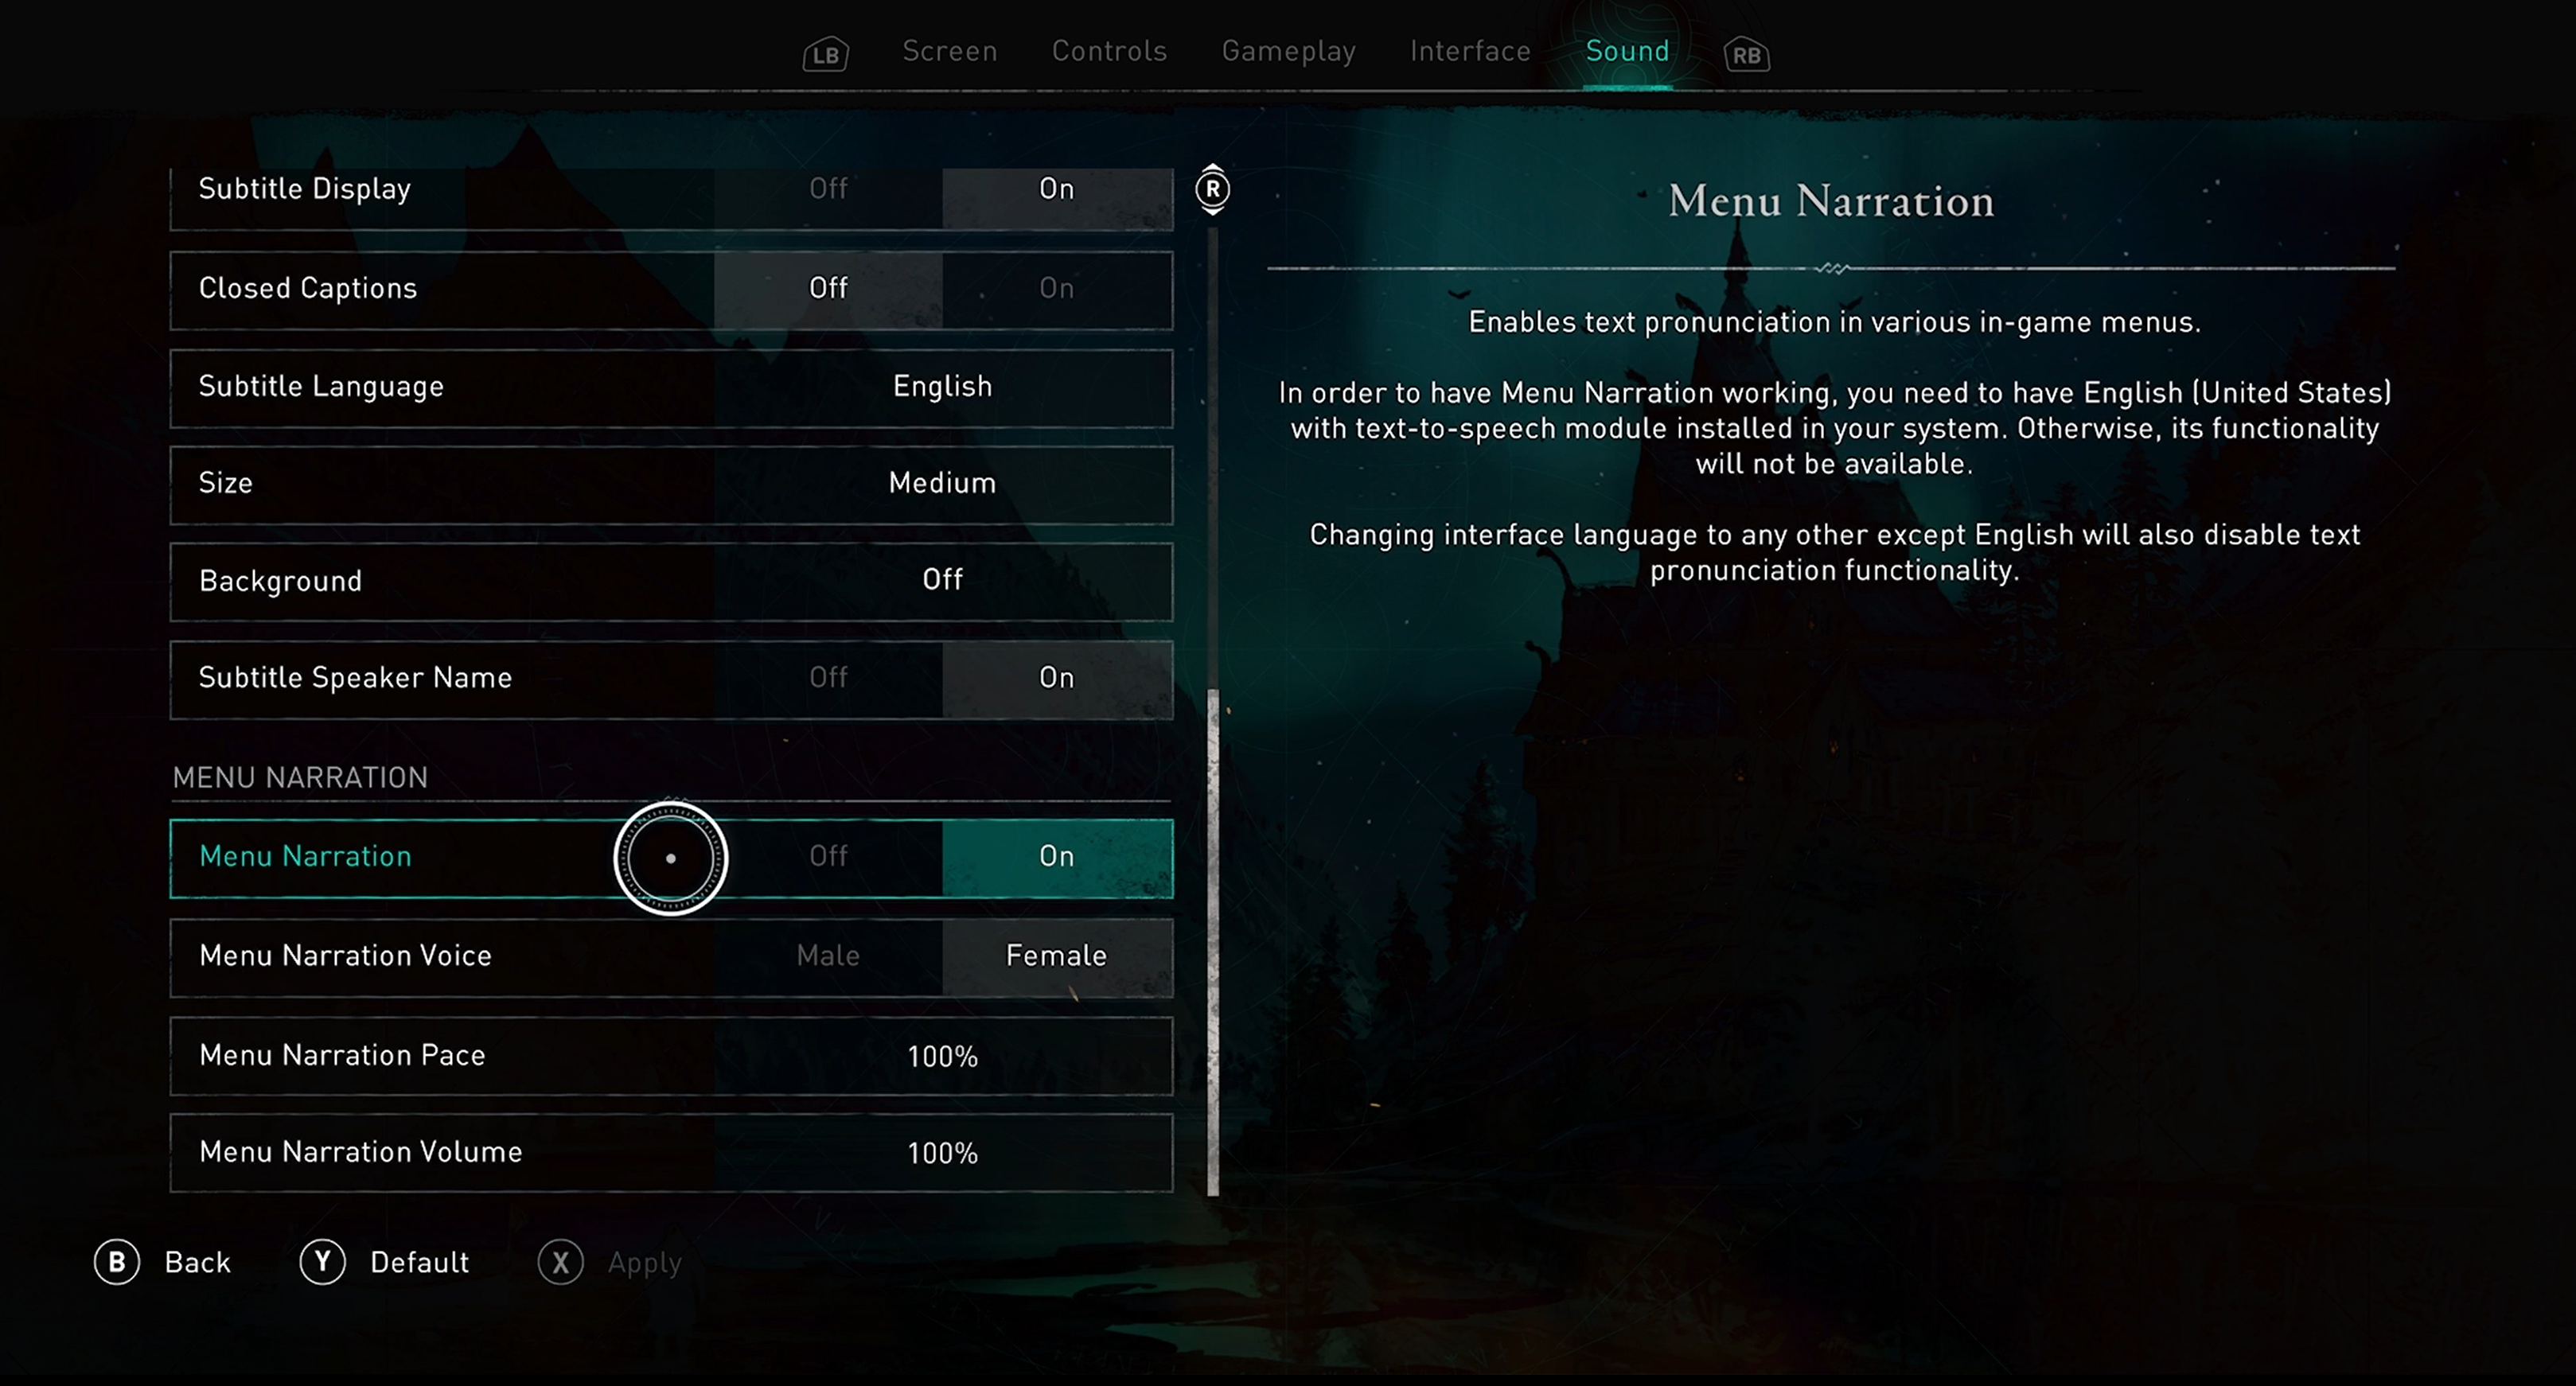 Assassin's Creed Valhalla screen shot of in-game Sound menu. Focus is on Menu Narration Pace setting which is set to 100%.